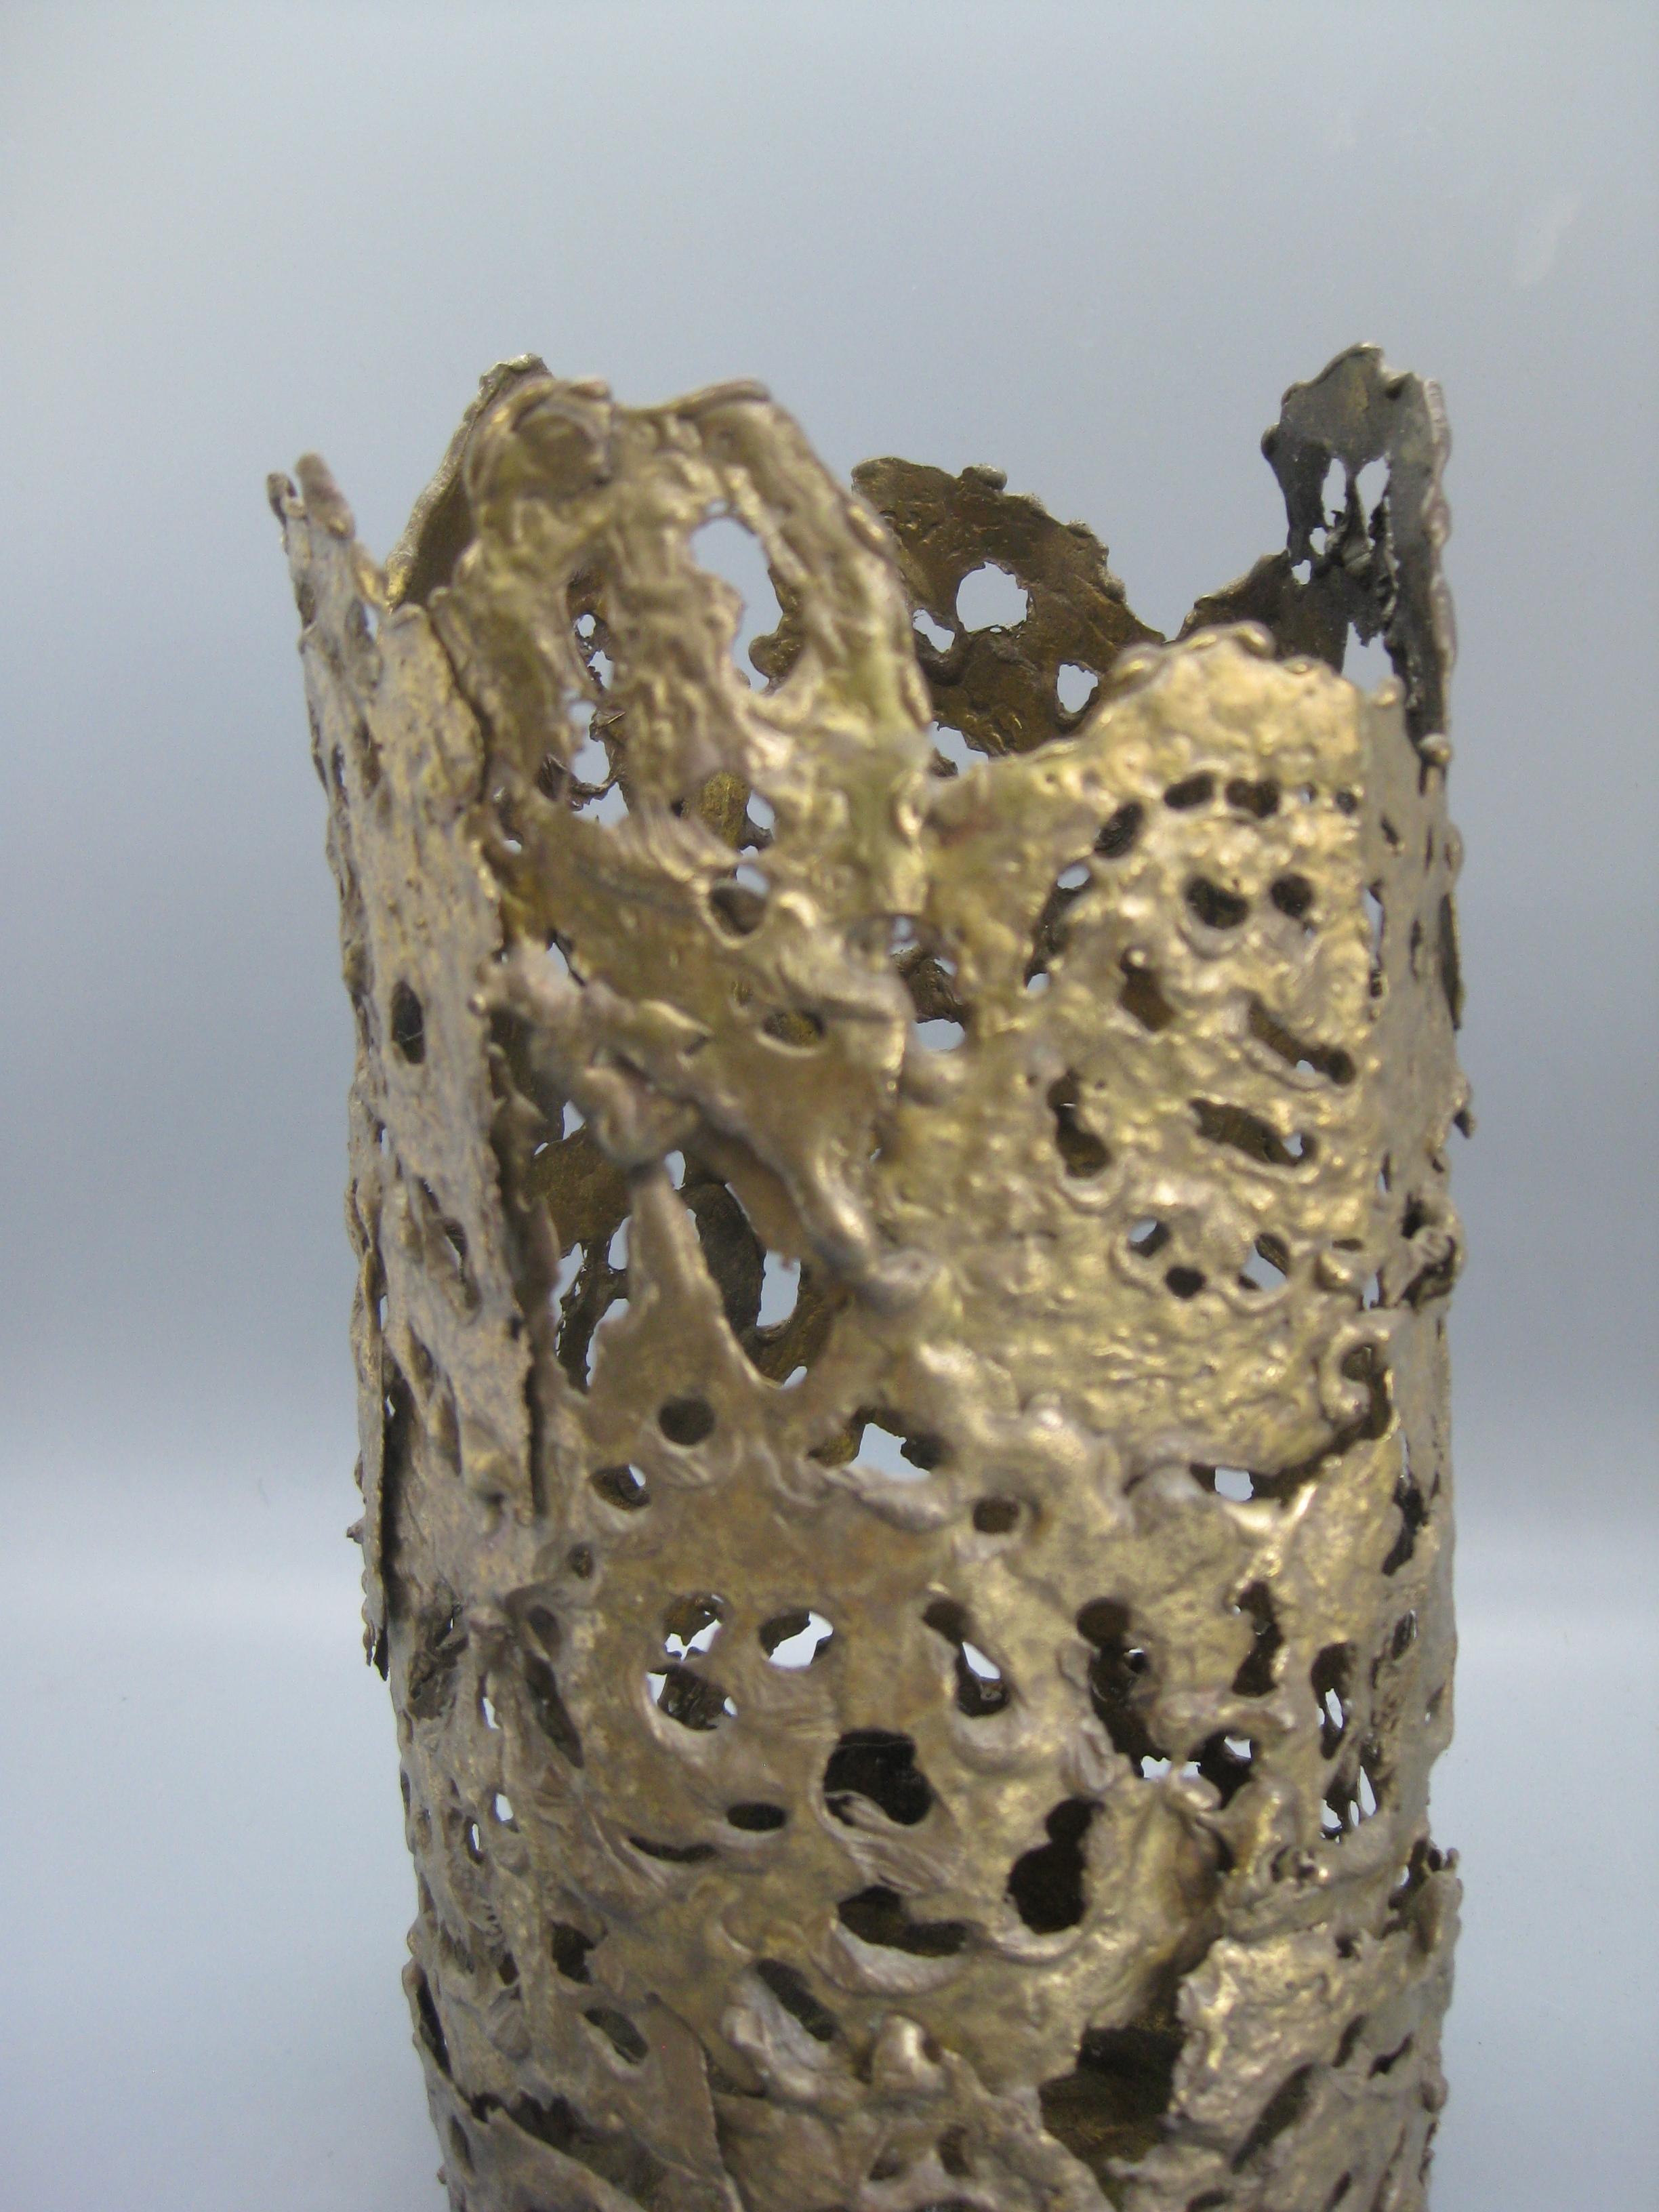 Great Brutalist torch-cut brass candleholder or vase sculpture dating from 1971. Signed by the artist 